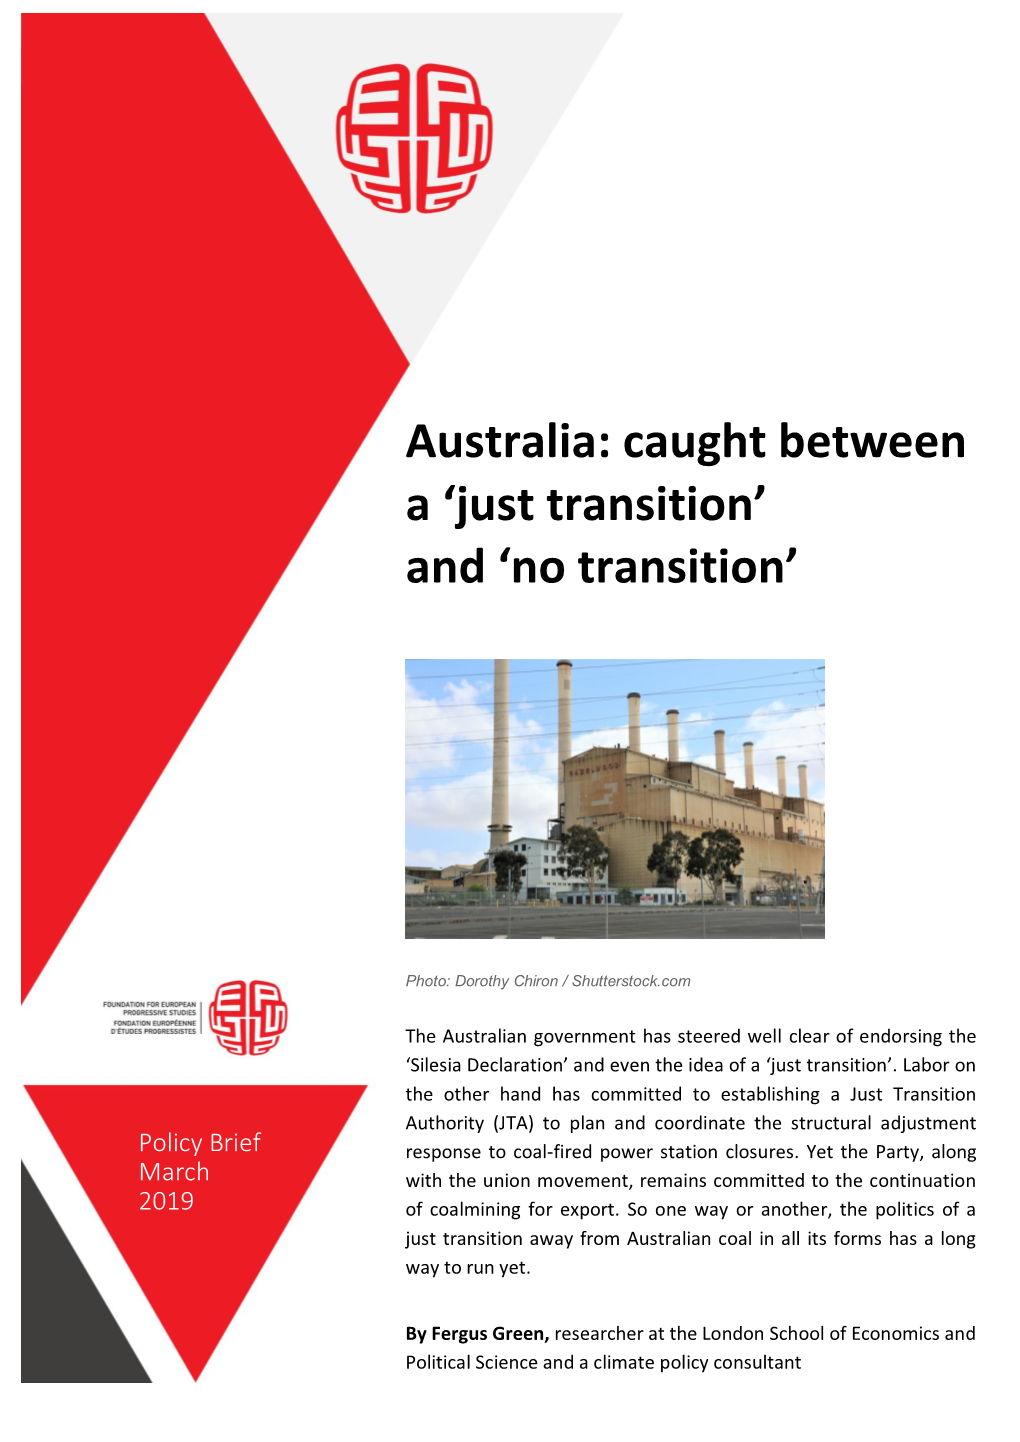 Australia: Caught Between a 'Just Transition' and 'No Transition'